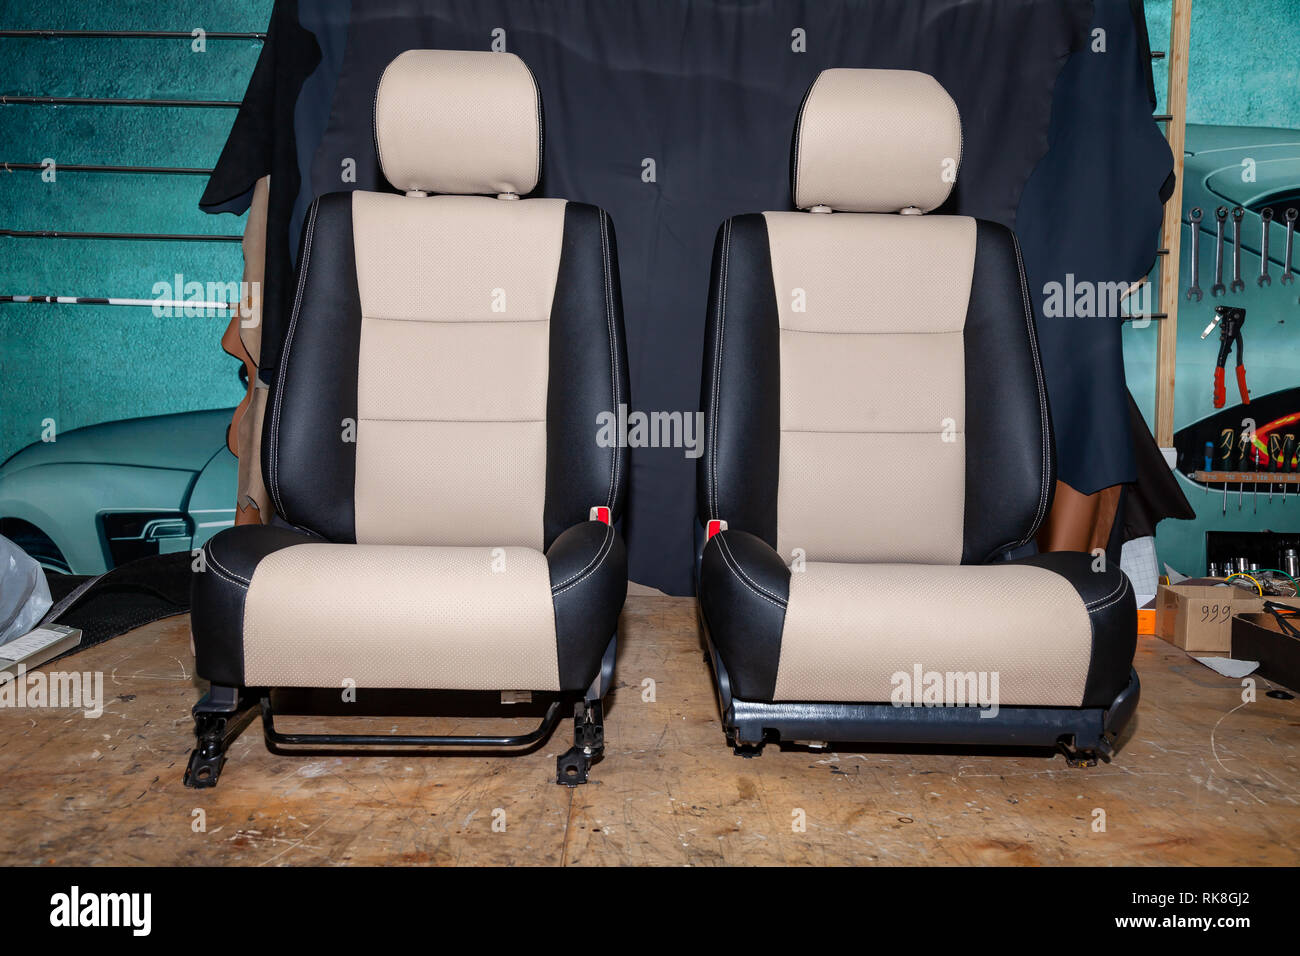 Two front seats with combined leather trim in two colors of black and  beige, located on the workbench in the workshop for repair and tuning of  cars an Stock Photo - Alamy